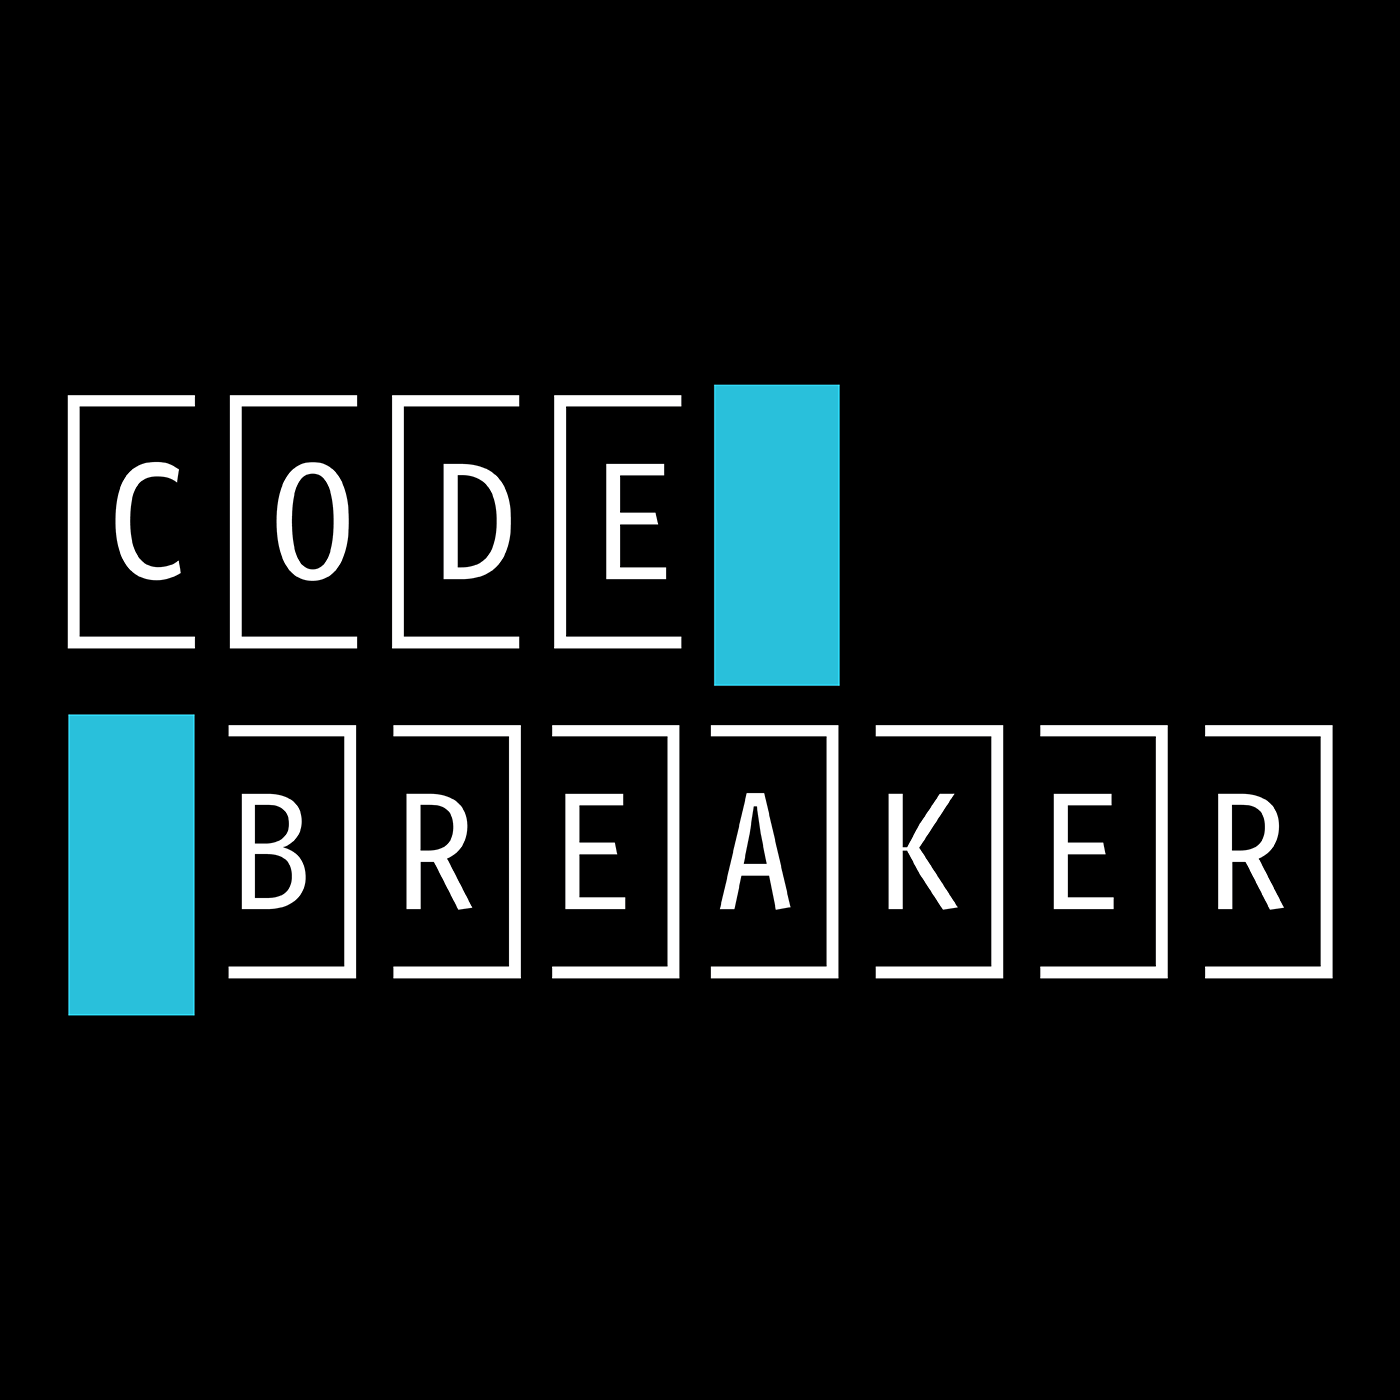 You have a message from Codebreaker